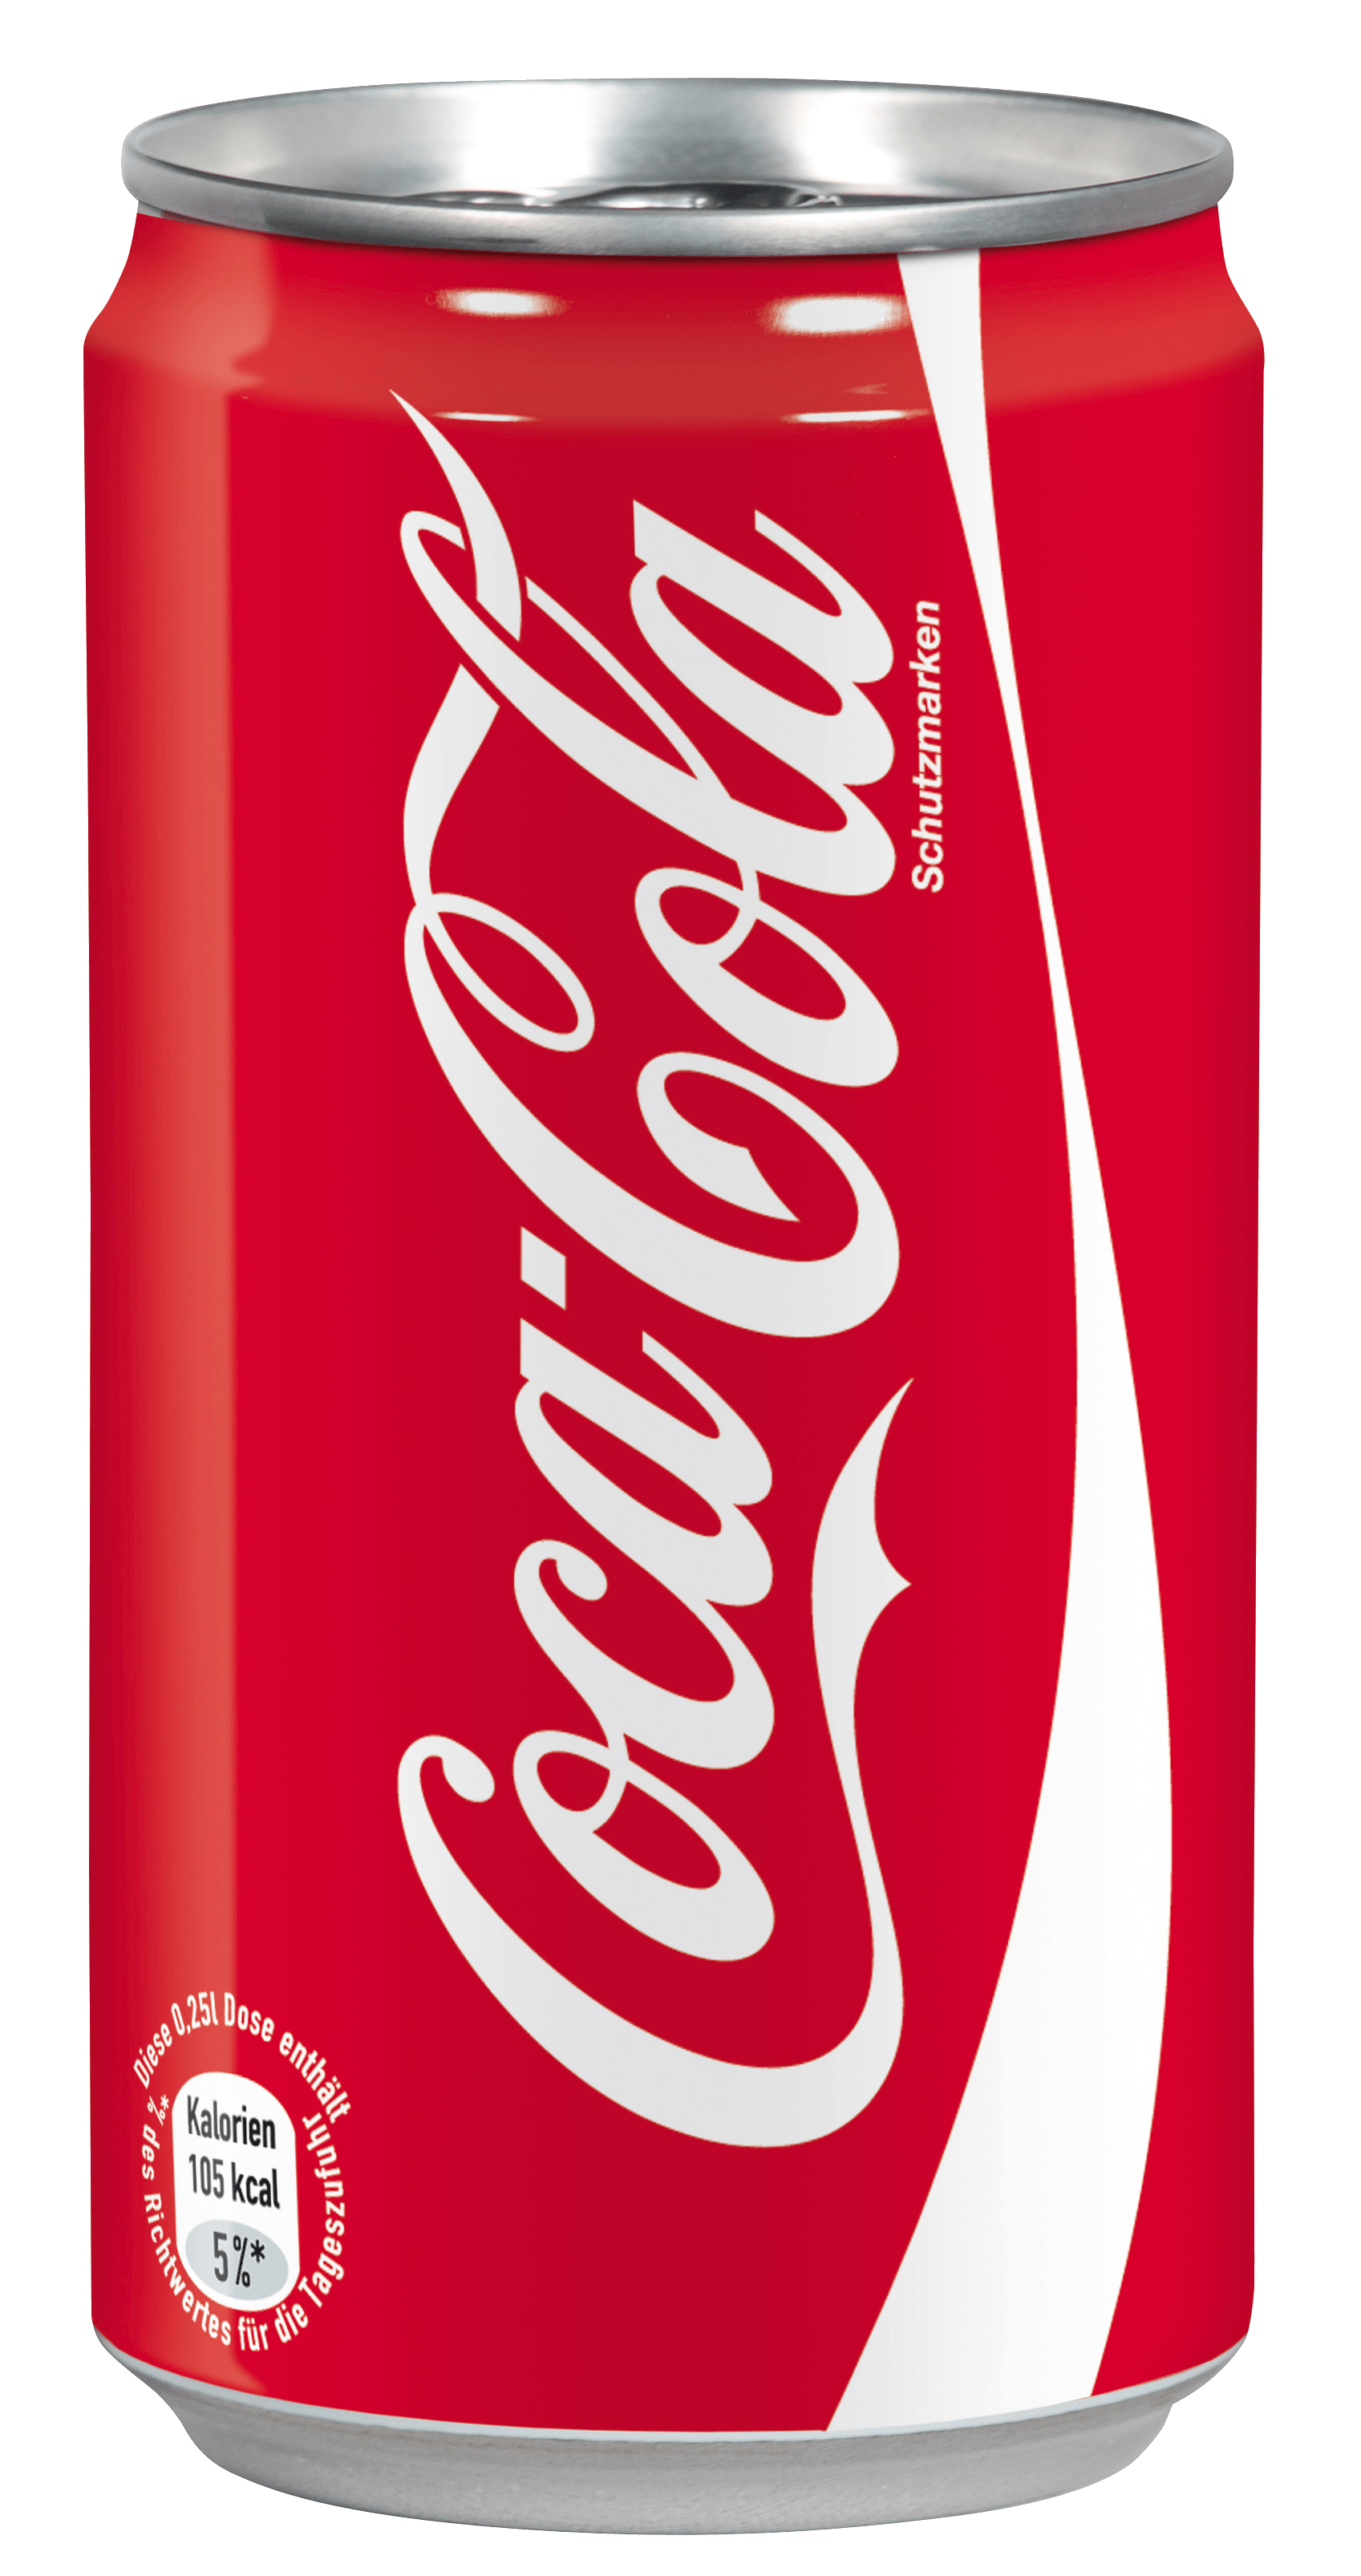 Coca Cola Can Png Image PNG Image